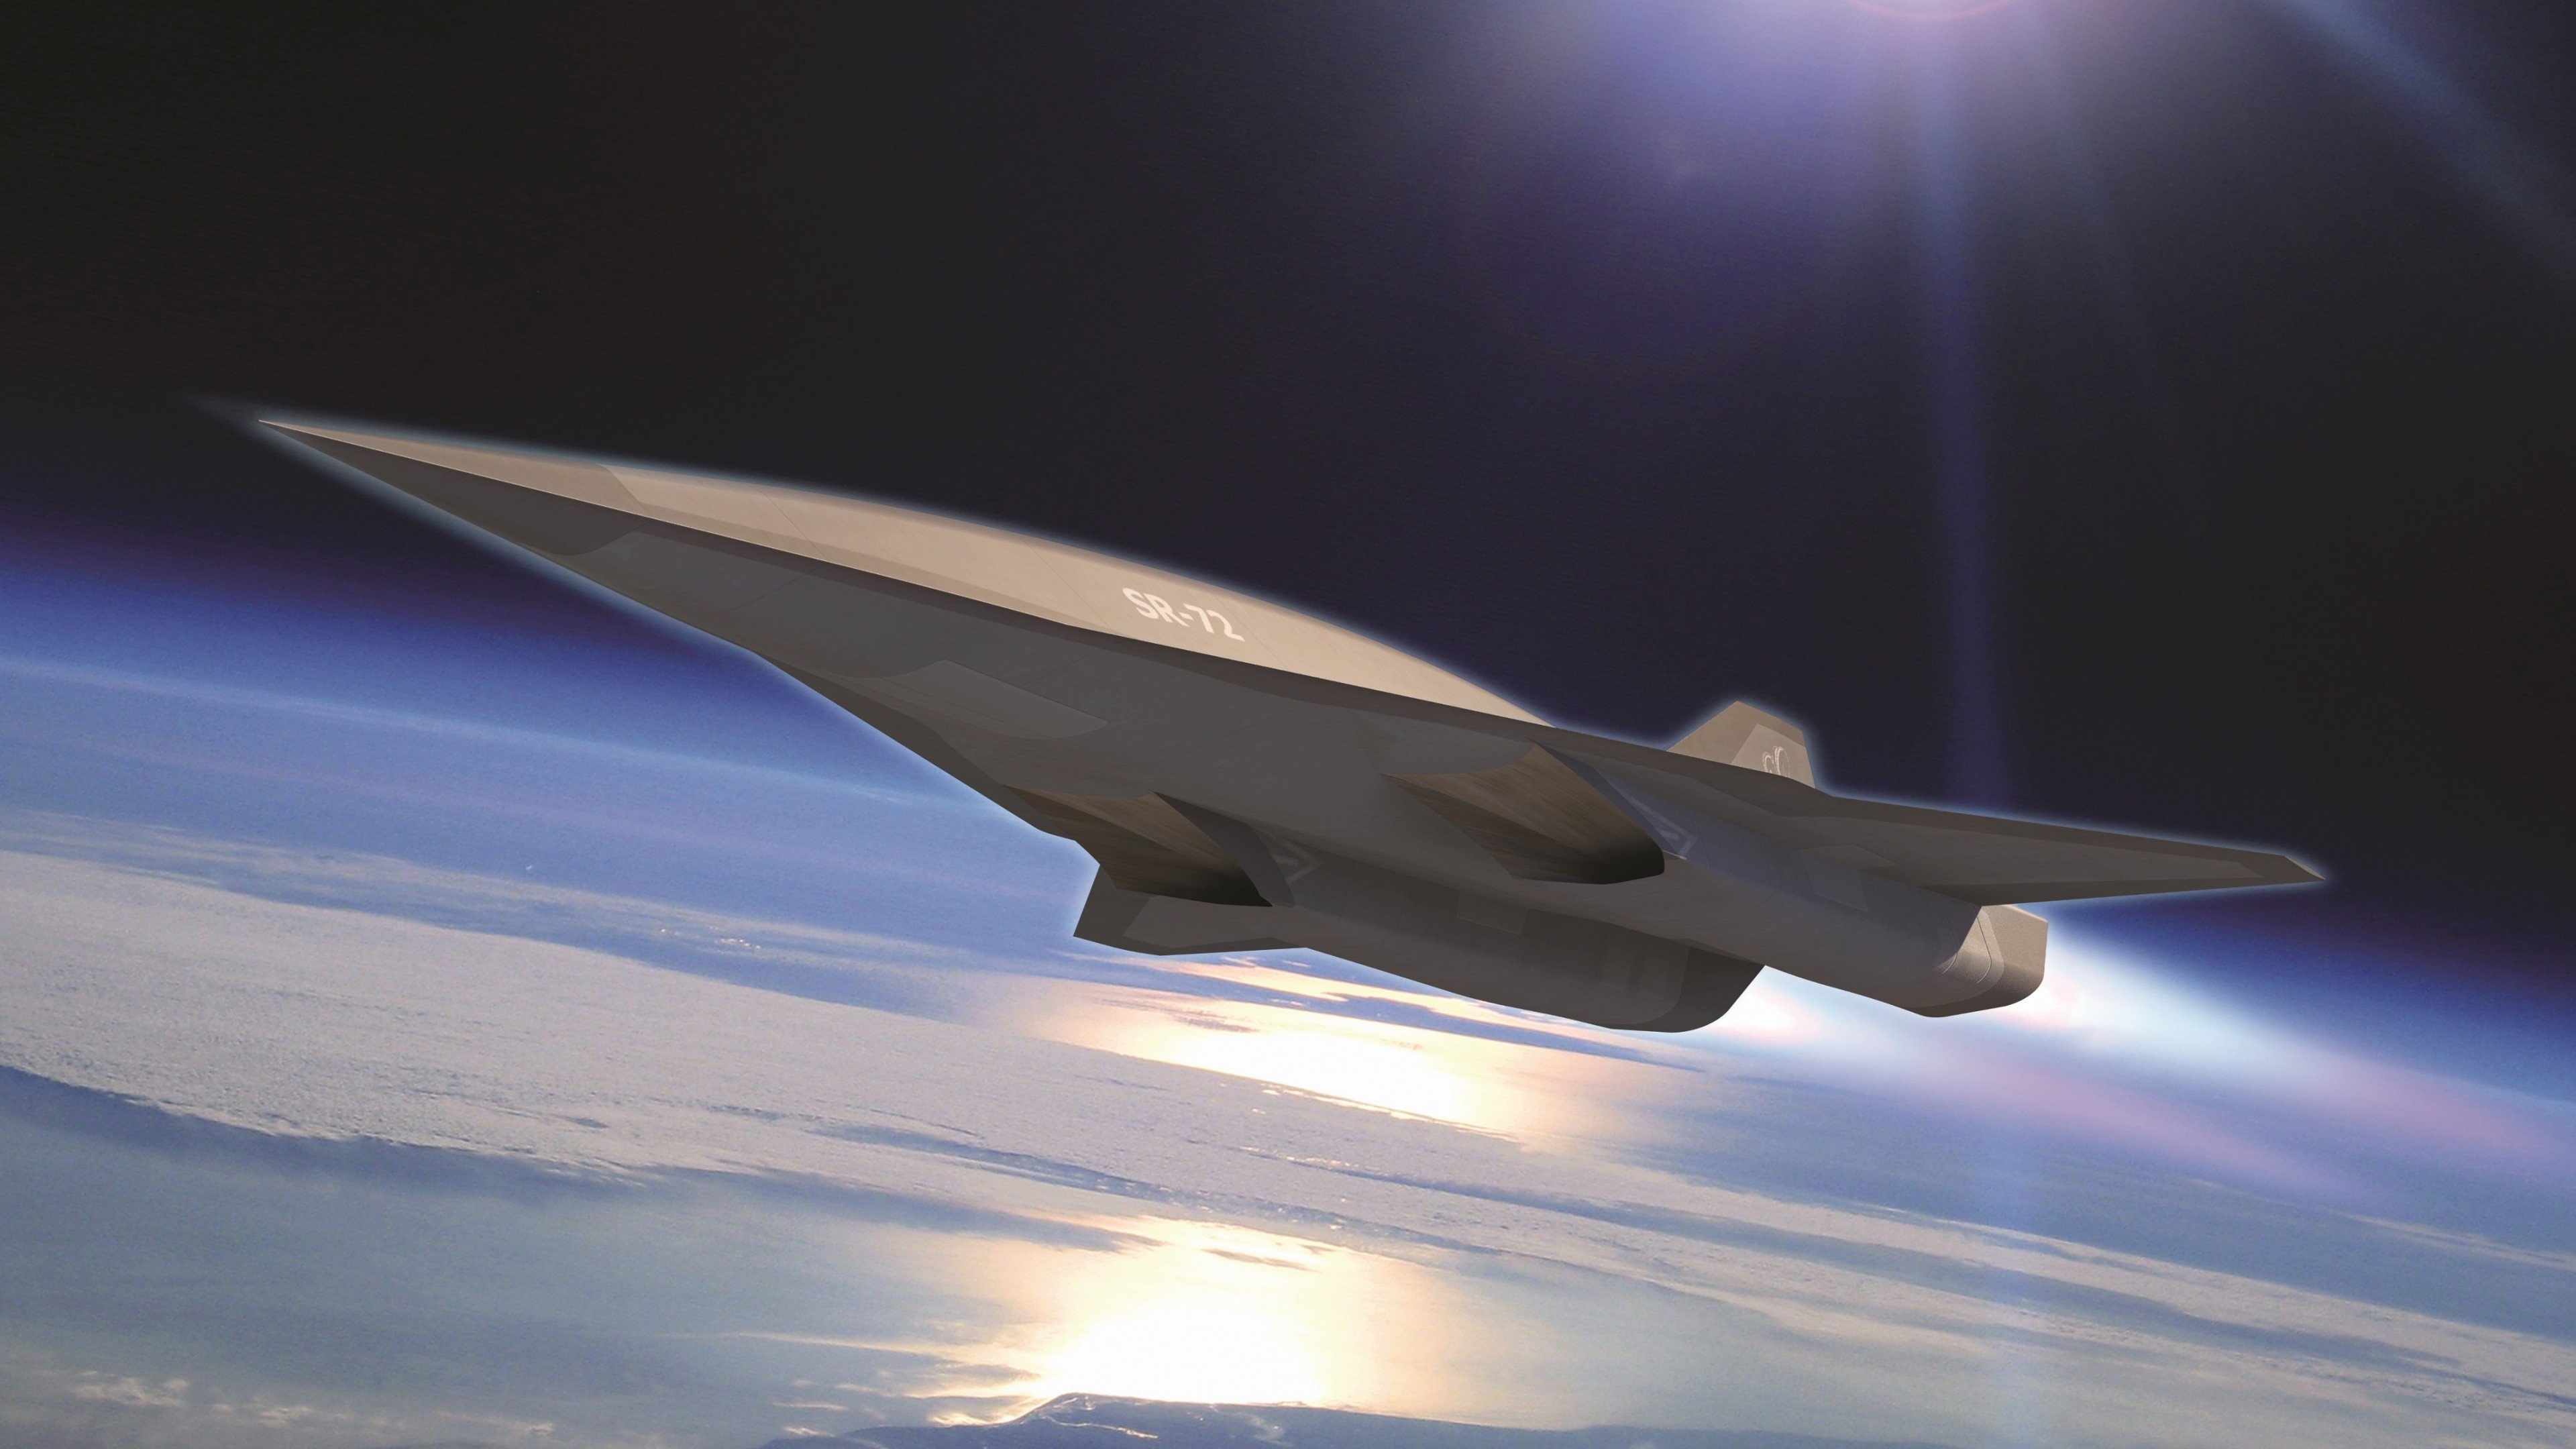 Wallpaper SR- Lockheed, Hypersonic Unmanned Reconnaissance Aircraft, Darpa, jet, plane, aircraft, U.S. Air Force, Military